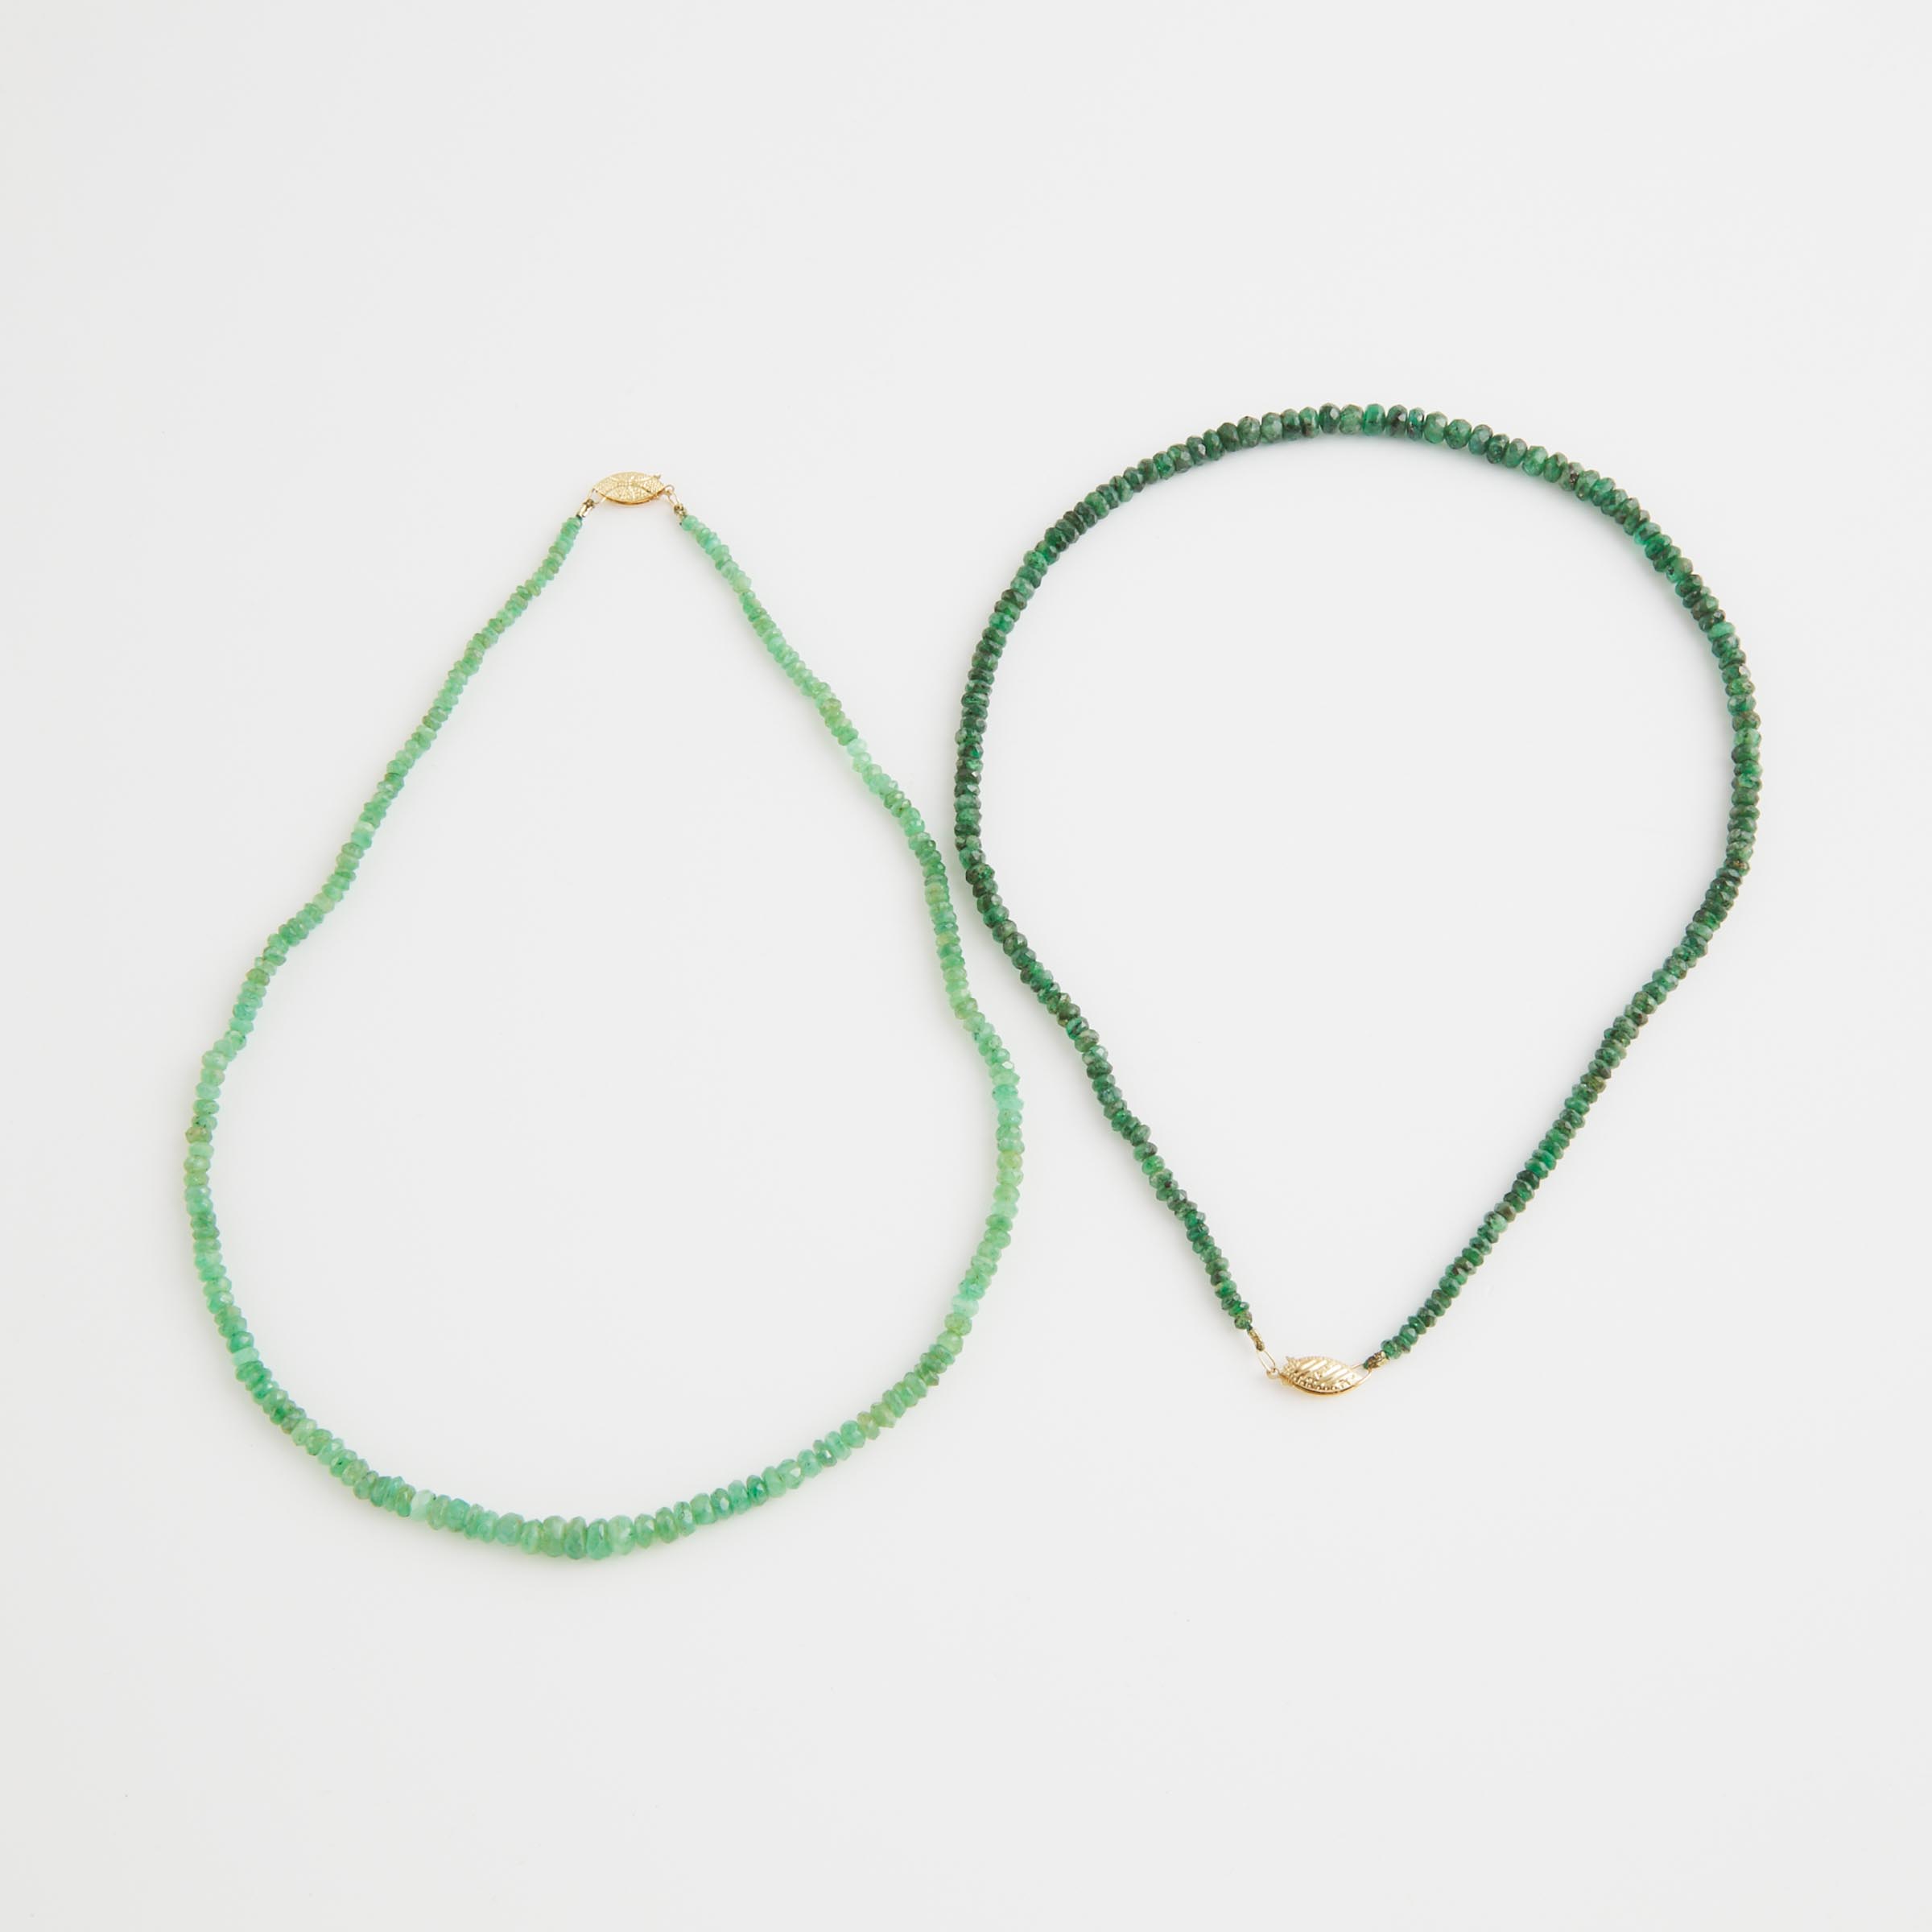 2 Facetted Emerald Bead Necklaces